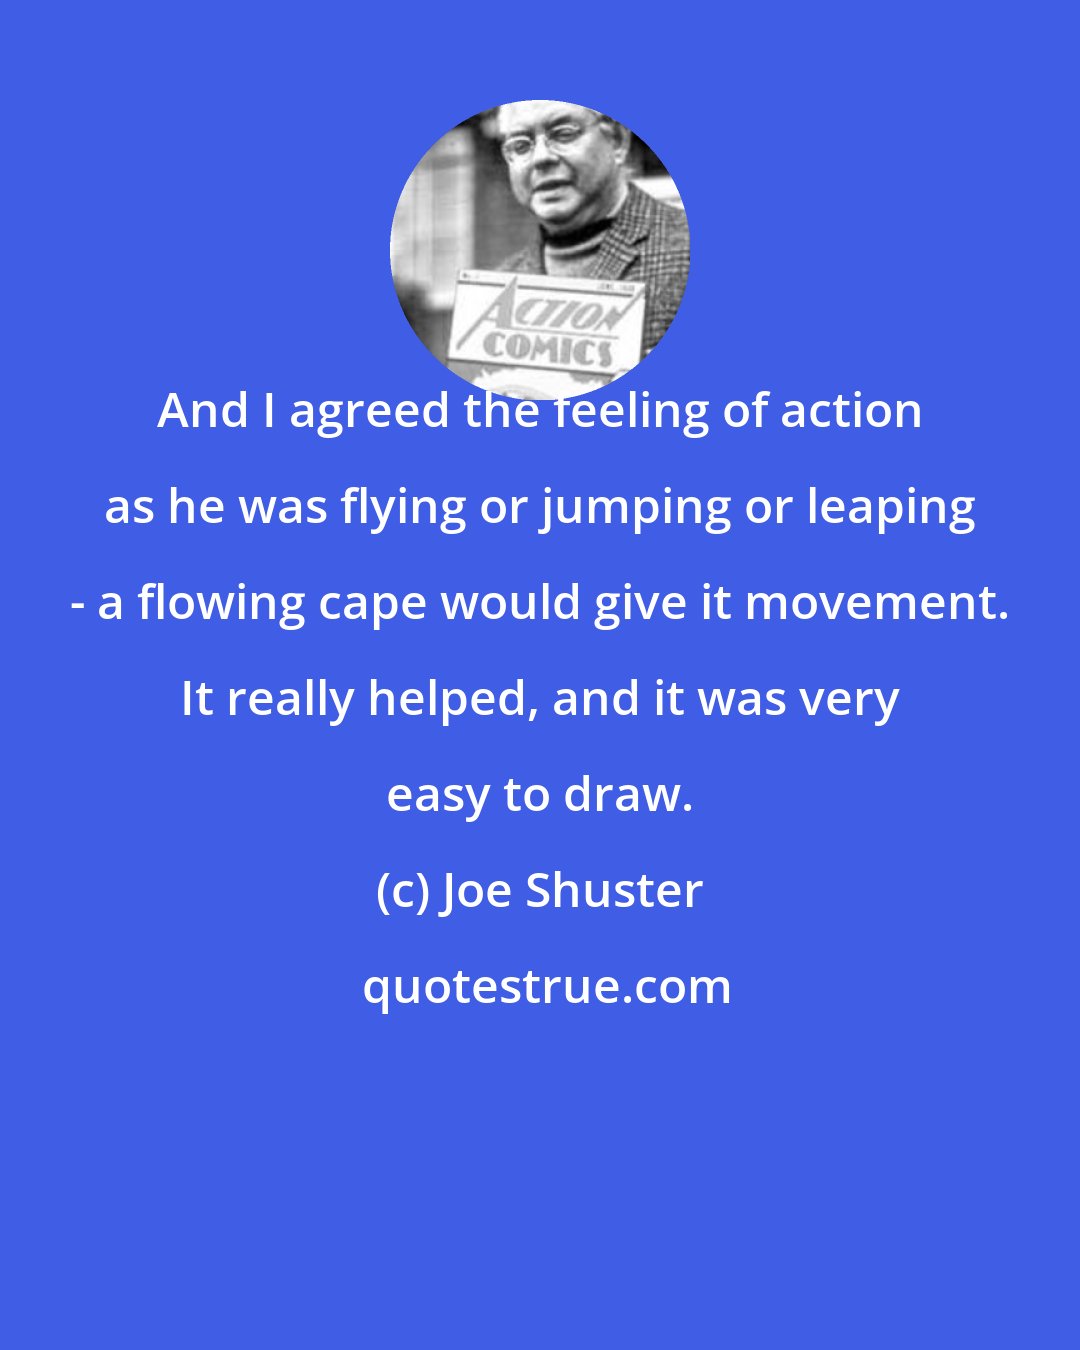 Joe Shuster: And I agreed the feeling of action as he was flying or jumping or leaping - a flowing cape would give it movement. It really helped, and it was very easy to draw.